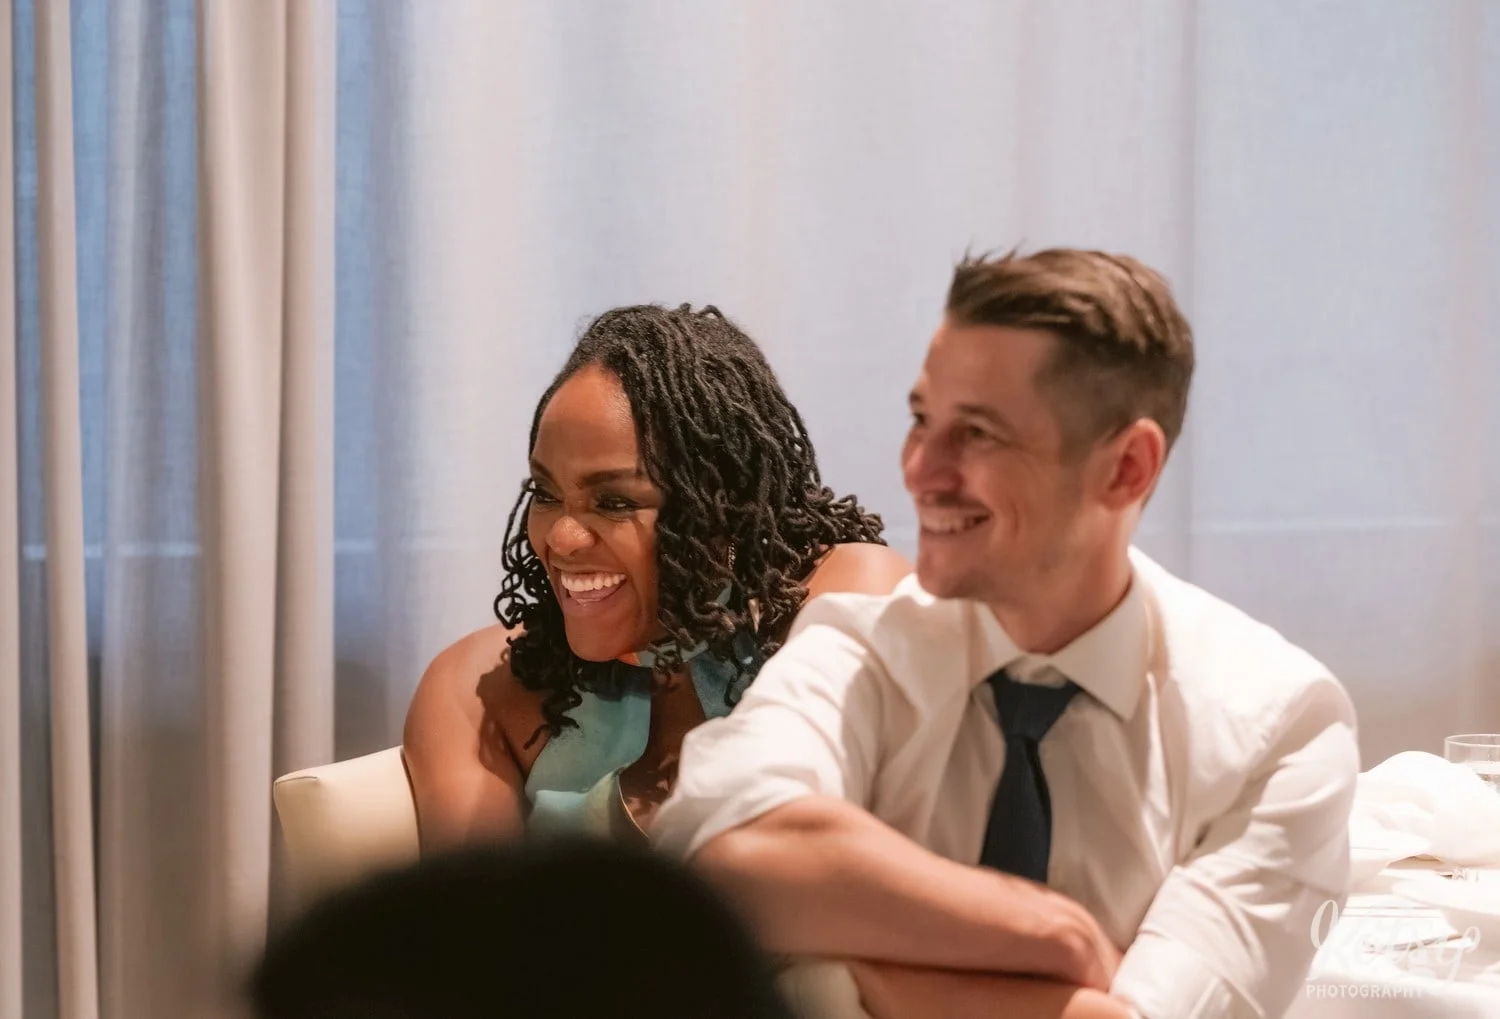 A woman and man enjoy a laugh while sitting at a table during a Village Loft wedding reception in Toronto, Canada